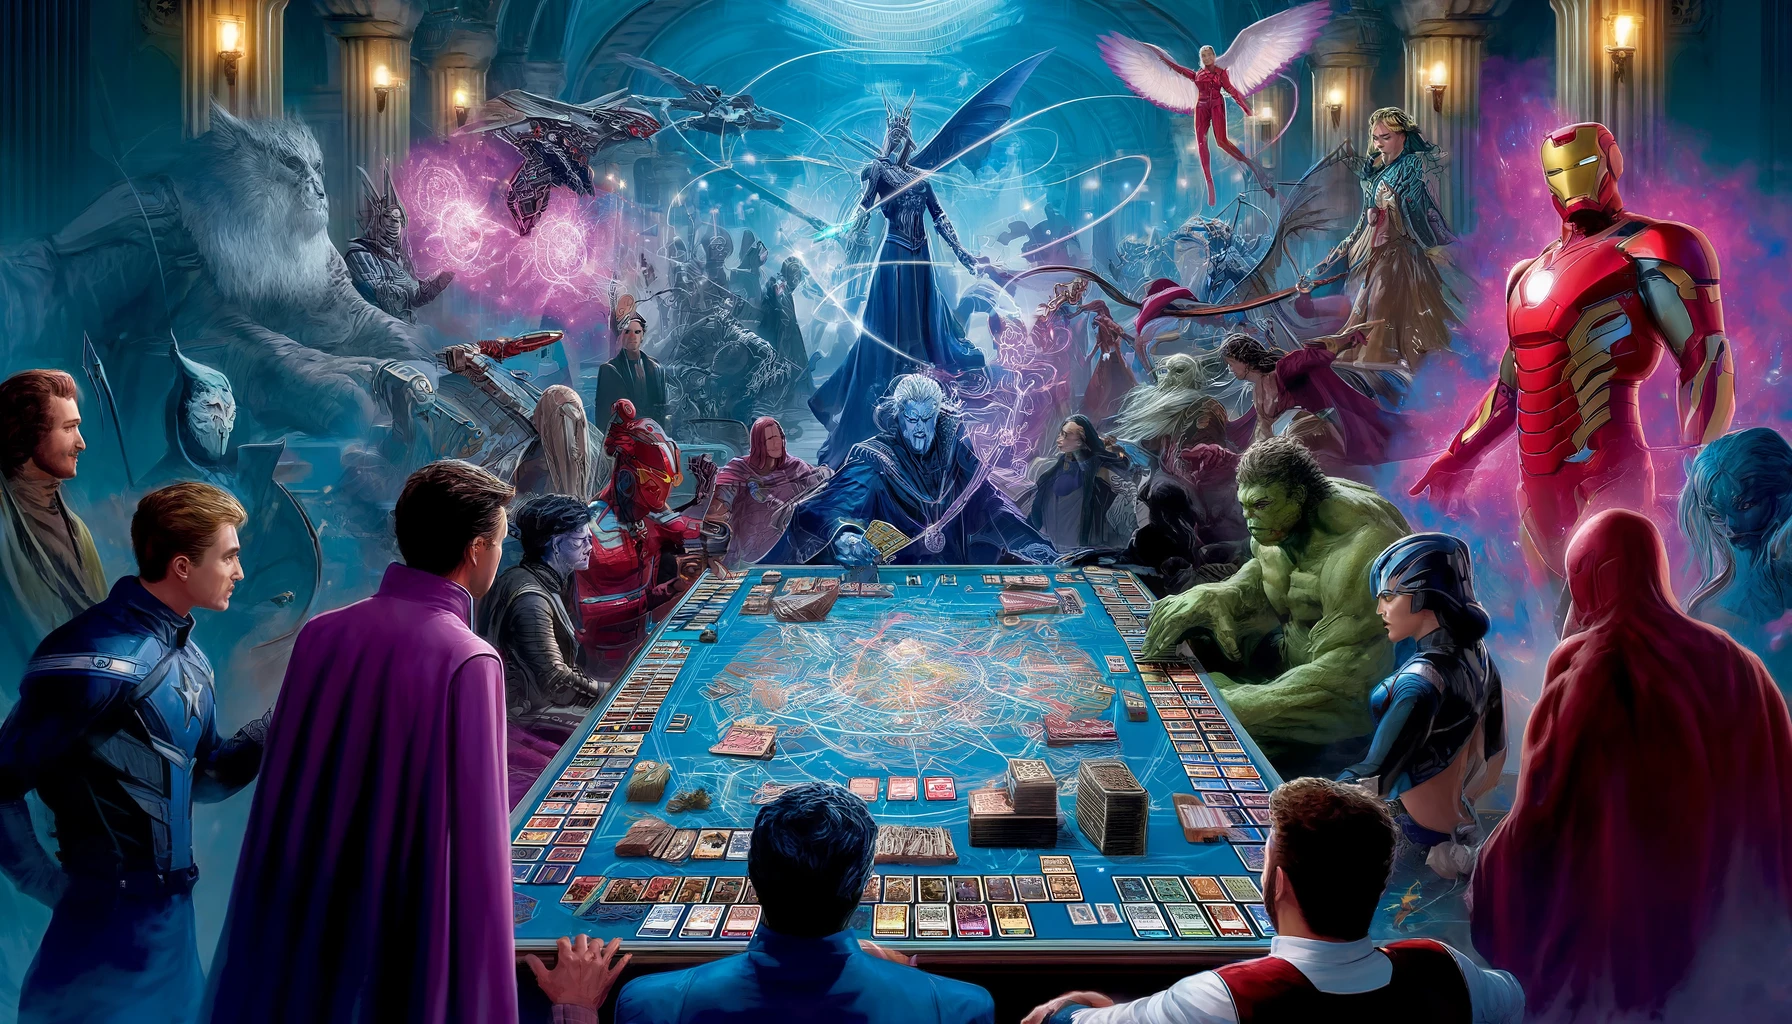 A vibrant, high-color-depth, wide-format image featuring characters from Marvel Snap's Pool 1 in a strategic board game setting. Characters are depicted in a mix of fantasy and sci-fi styles, engaged in strategic planning and dynamic poses against an imaginative, otherworldly background with futuristic and magical elements.